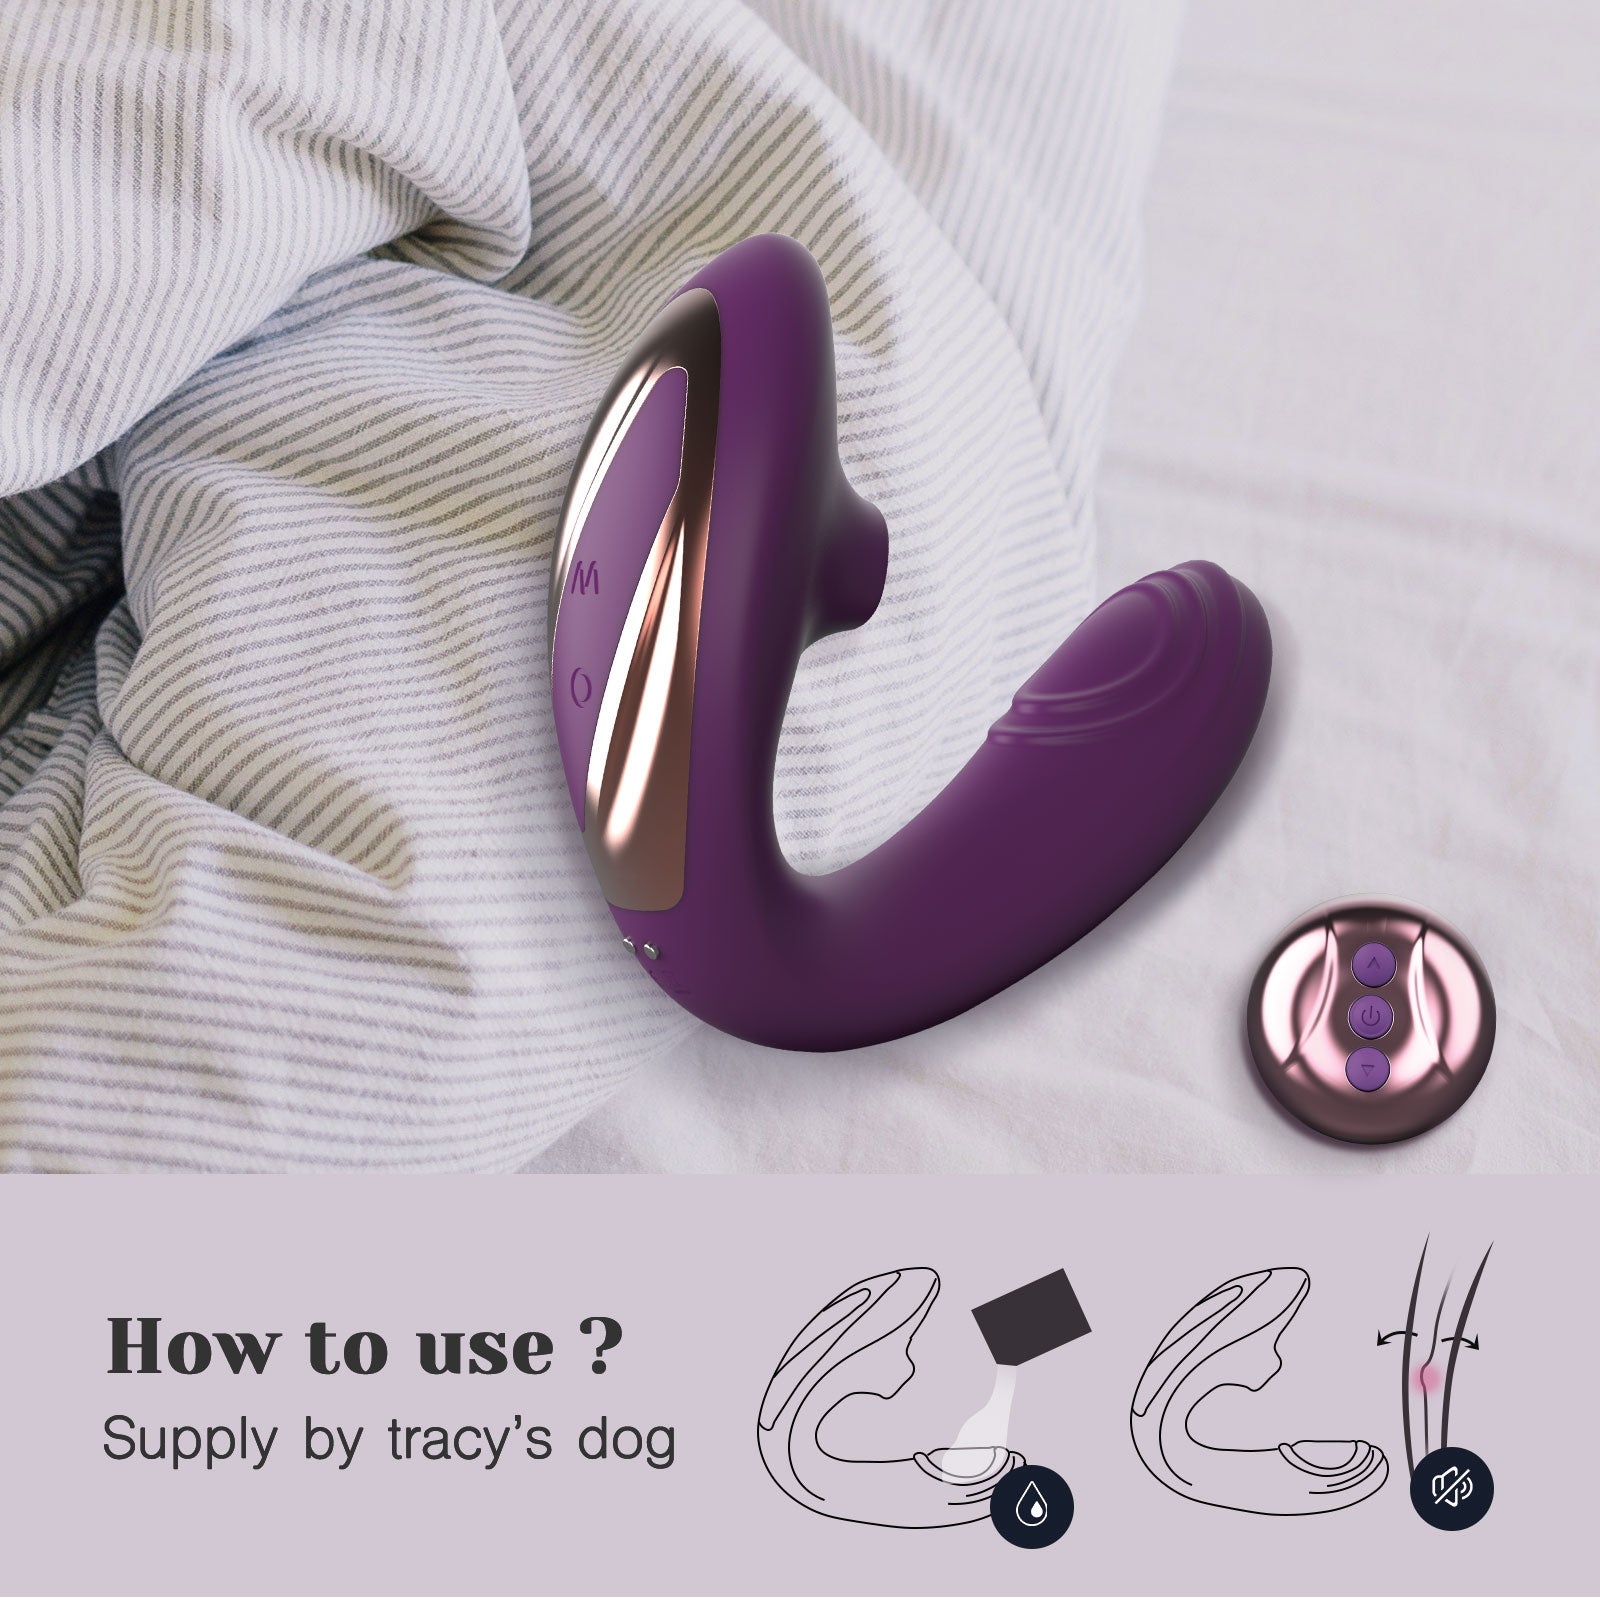 Juicy Clitoral Licking Vibrator, Clitoral and G-Spot stimulation, 7 tongue vibration modes and 10 pulsating modes, Remotely control the sensitivity, Wireless charging, Silky-soft silicone